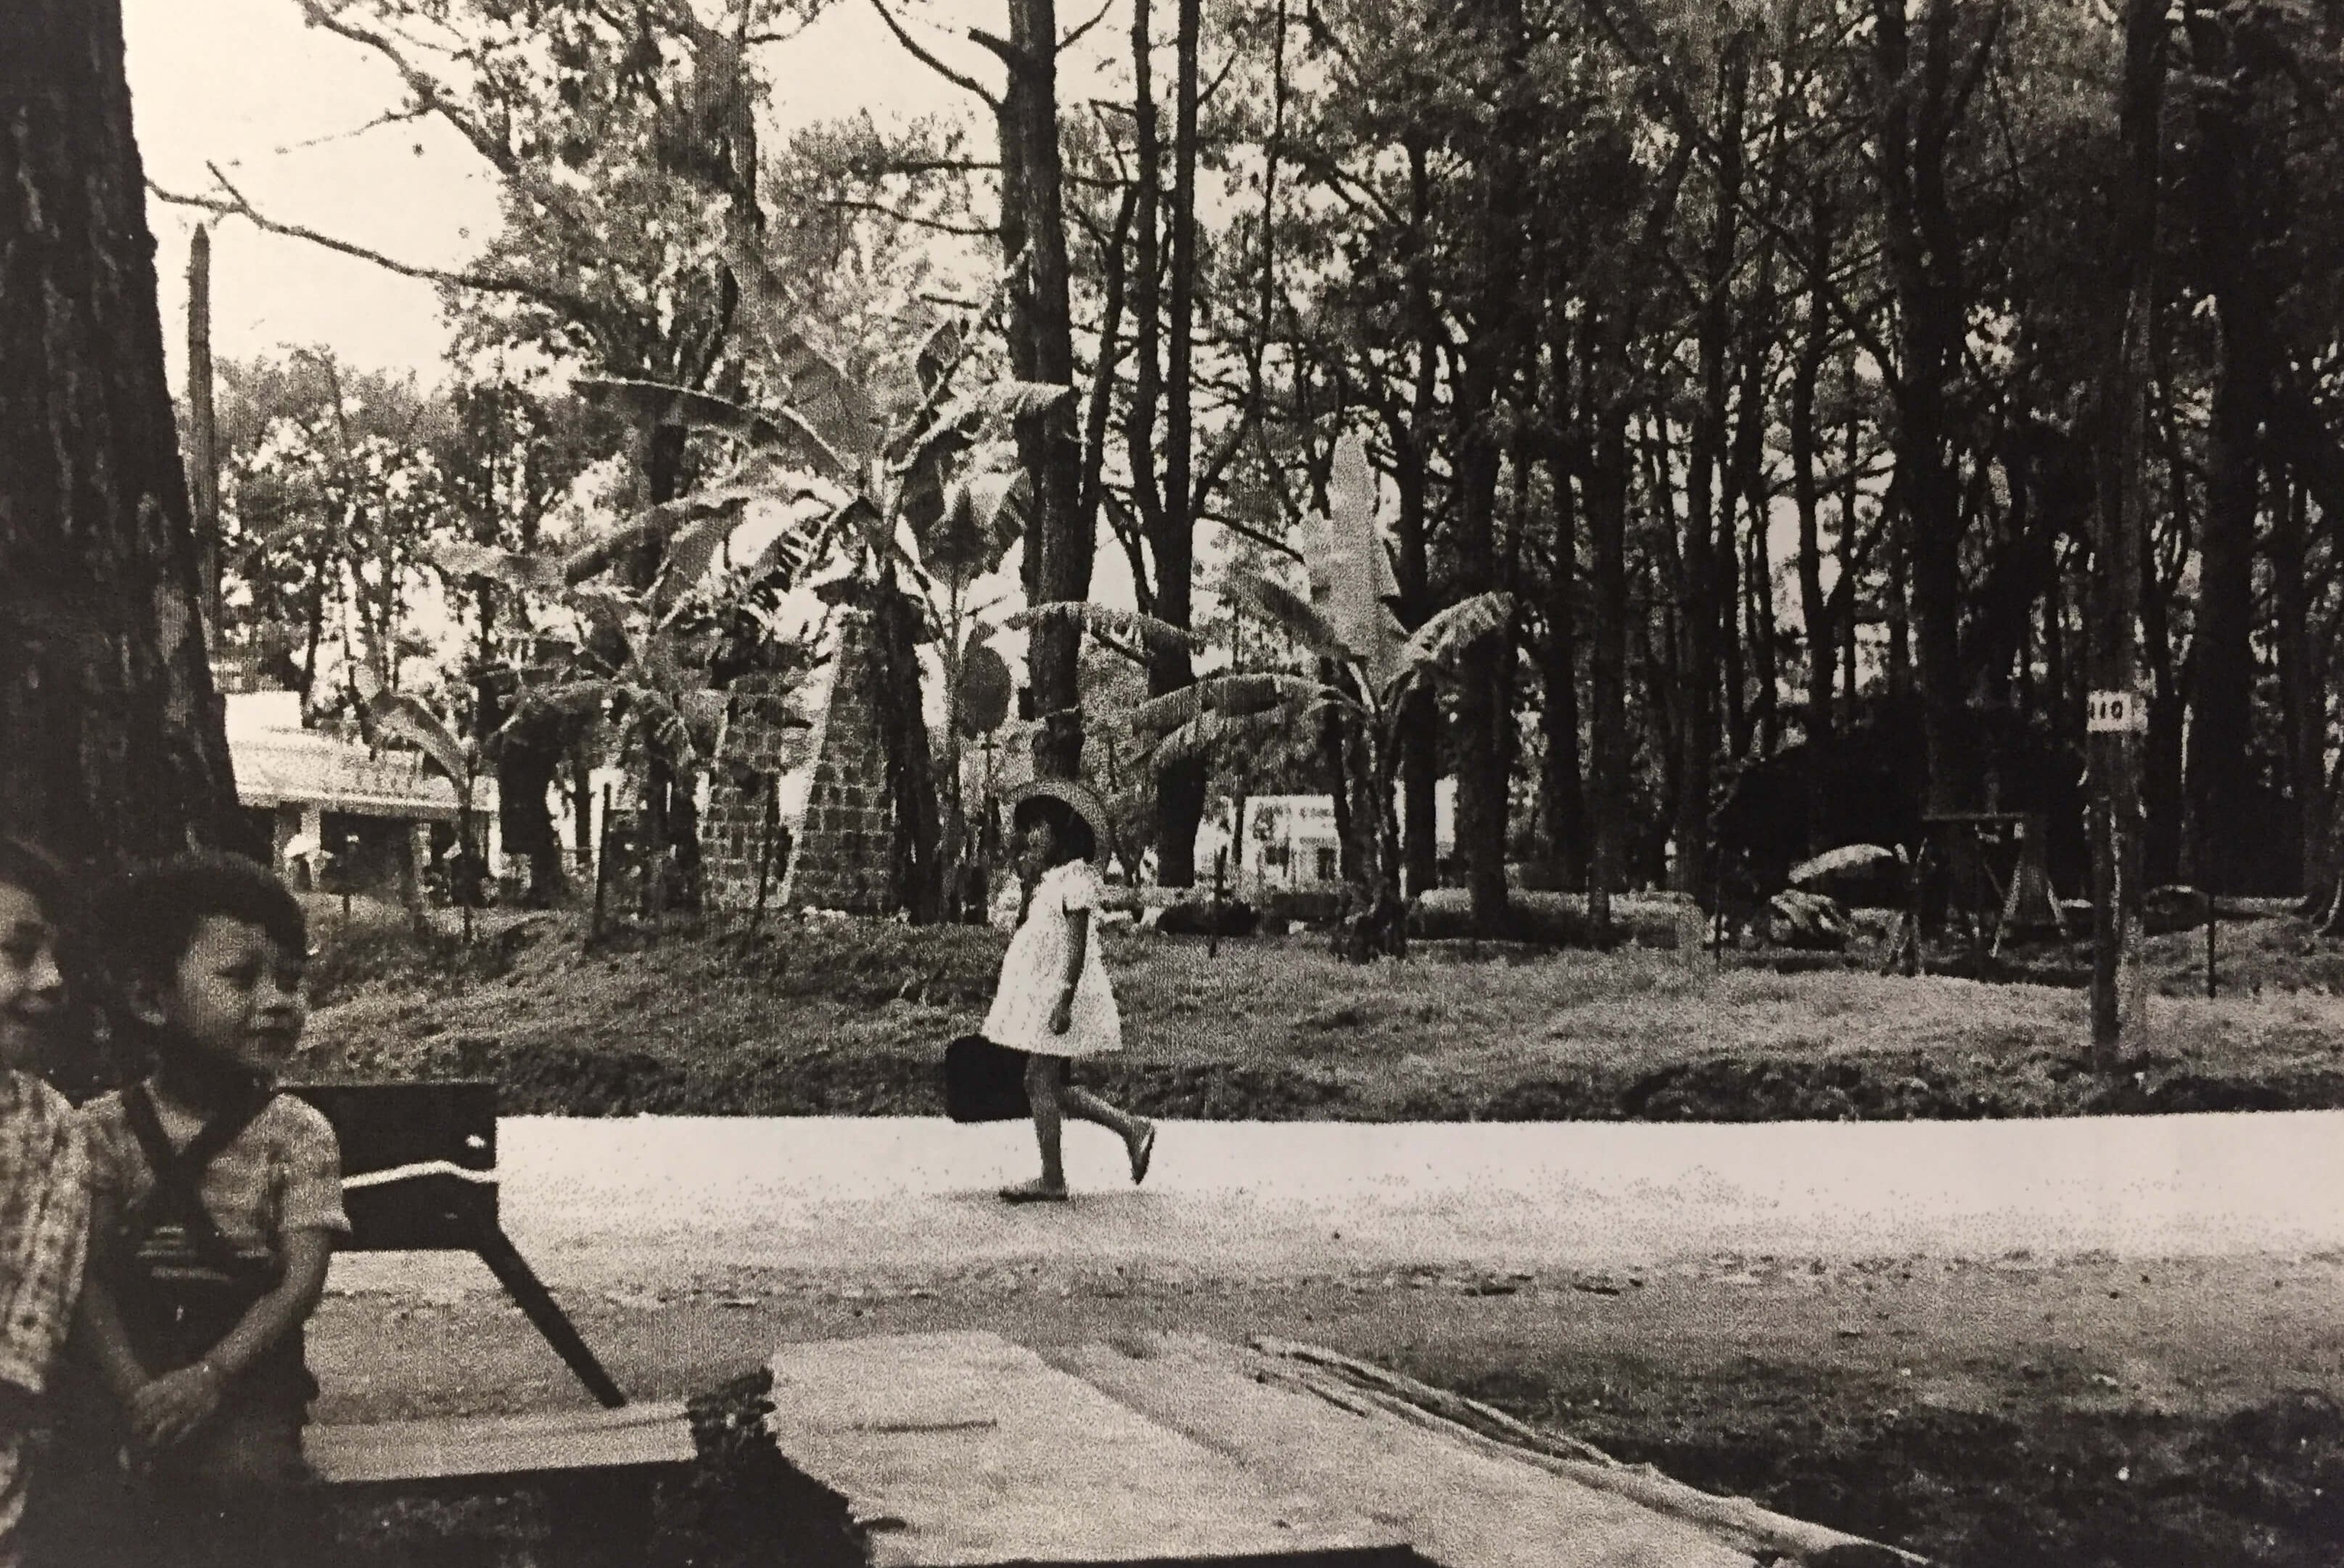 Young Asian child in white dress walking along the road. Two very young boys on a bench in the left foreground.